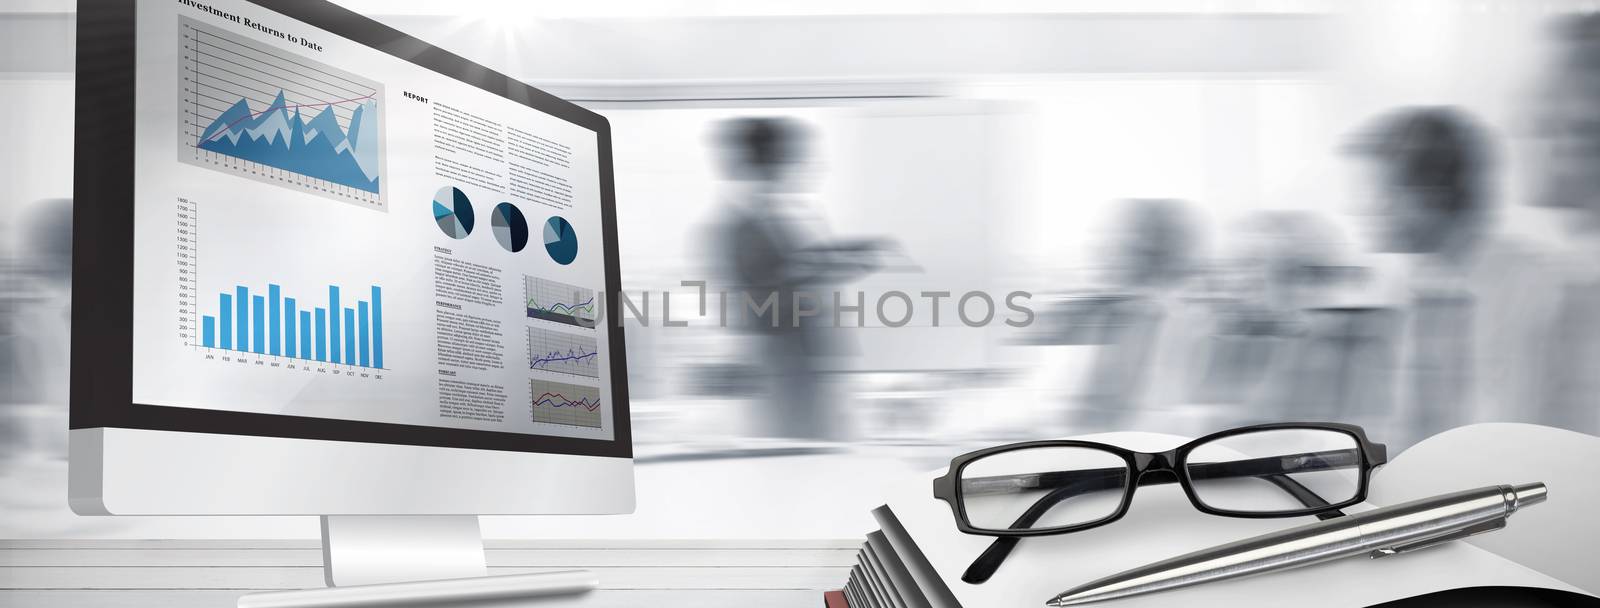 Composite image of business interface by Wavebreakmedia